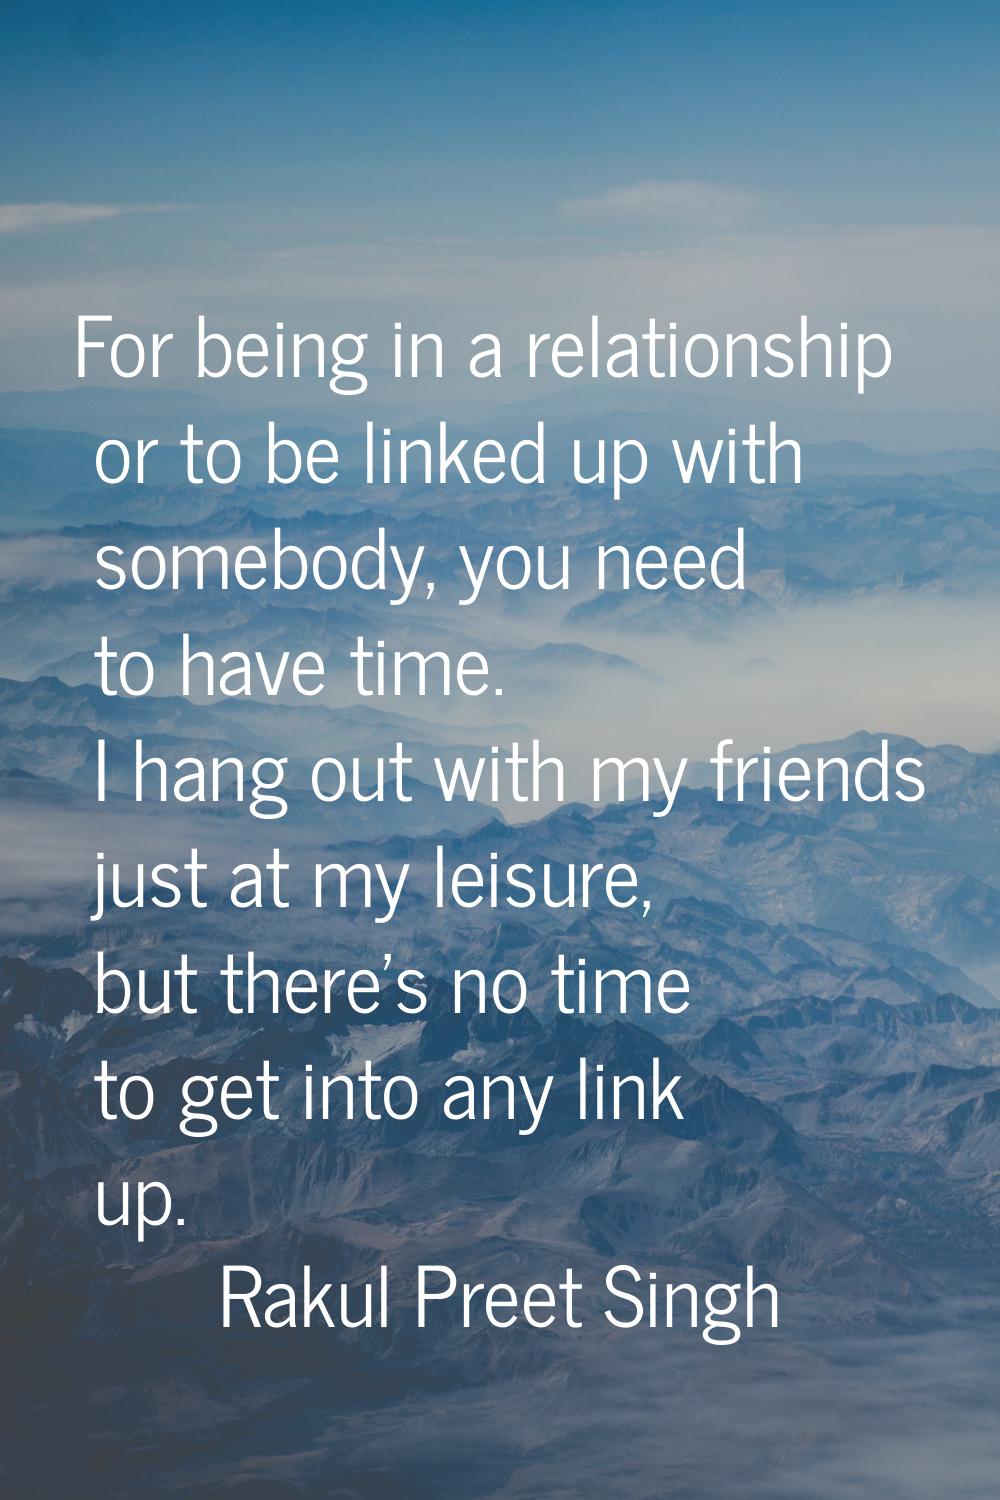 For being in a relationship or to be linked up with somebody, you need to have time. I hang out wit